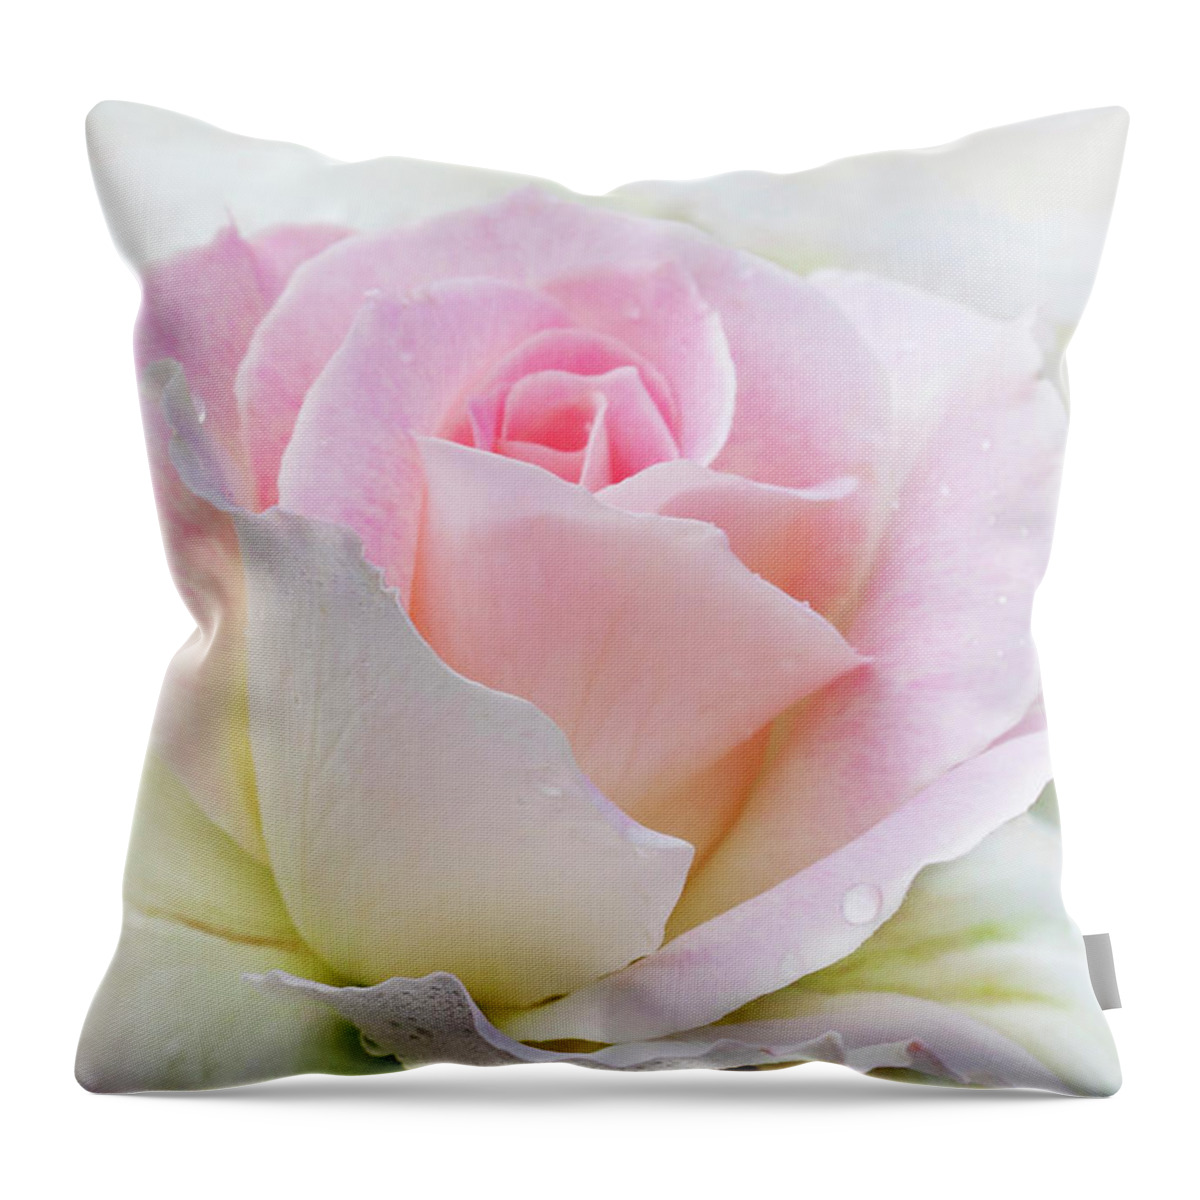 Gentle Beauty Throw Pillow featuring the photograph Gentle Beauty by Patty Colabuono